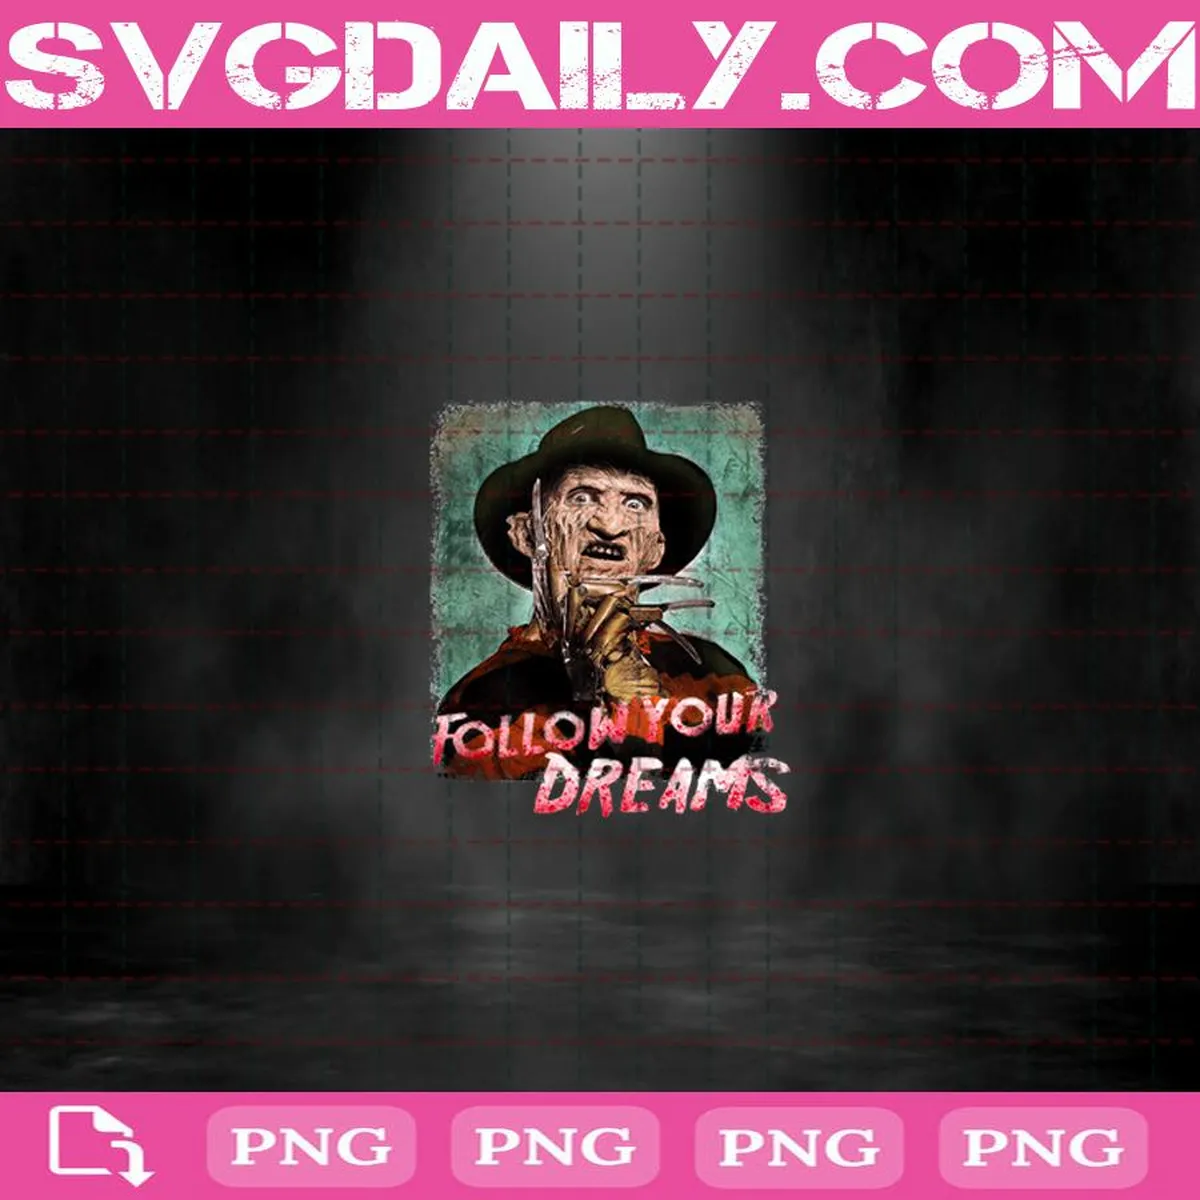 Follow Your Dreams Png, Horror Png, Halloween Png, Horror Halloween Png